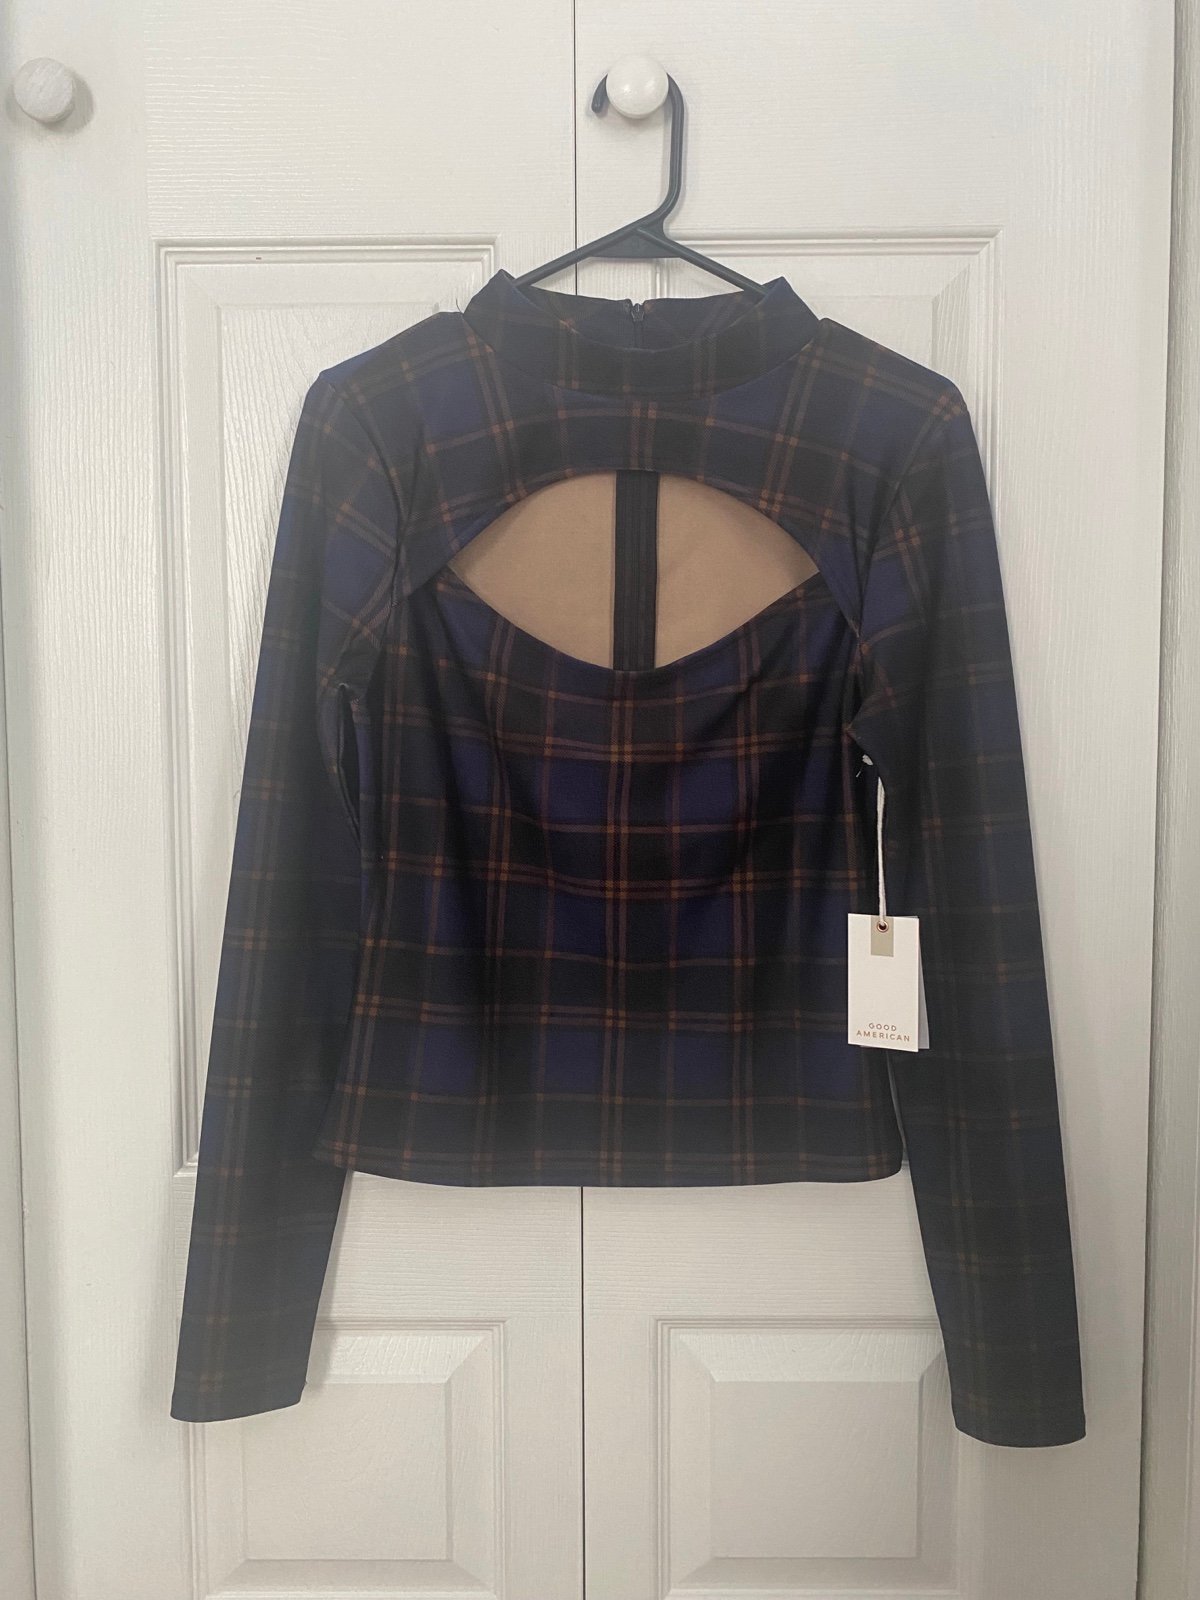 large discount Good American Plaid Long Sleeve Top pOmTW9e94 Counter Genuine 